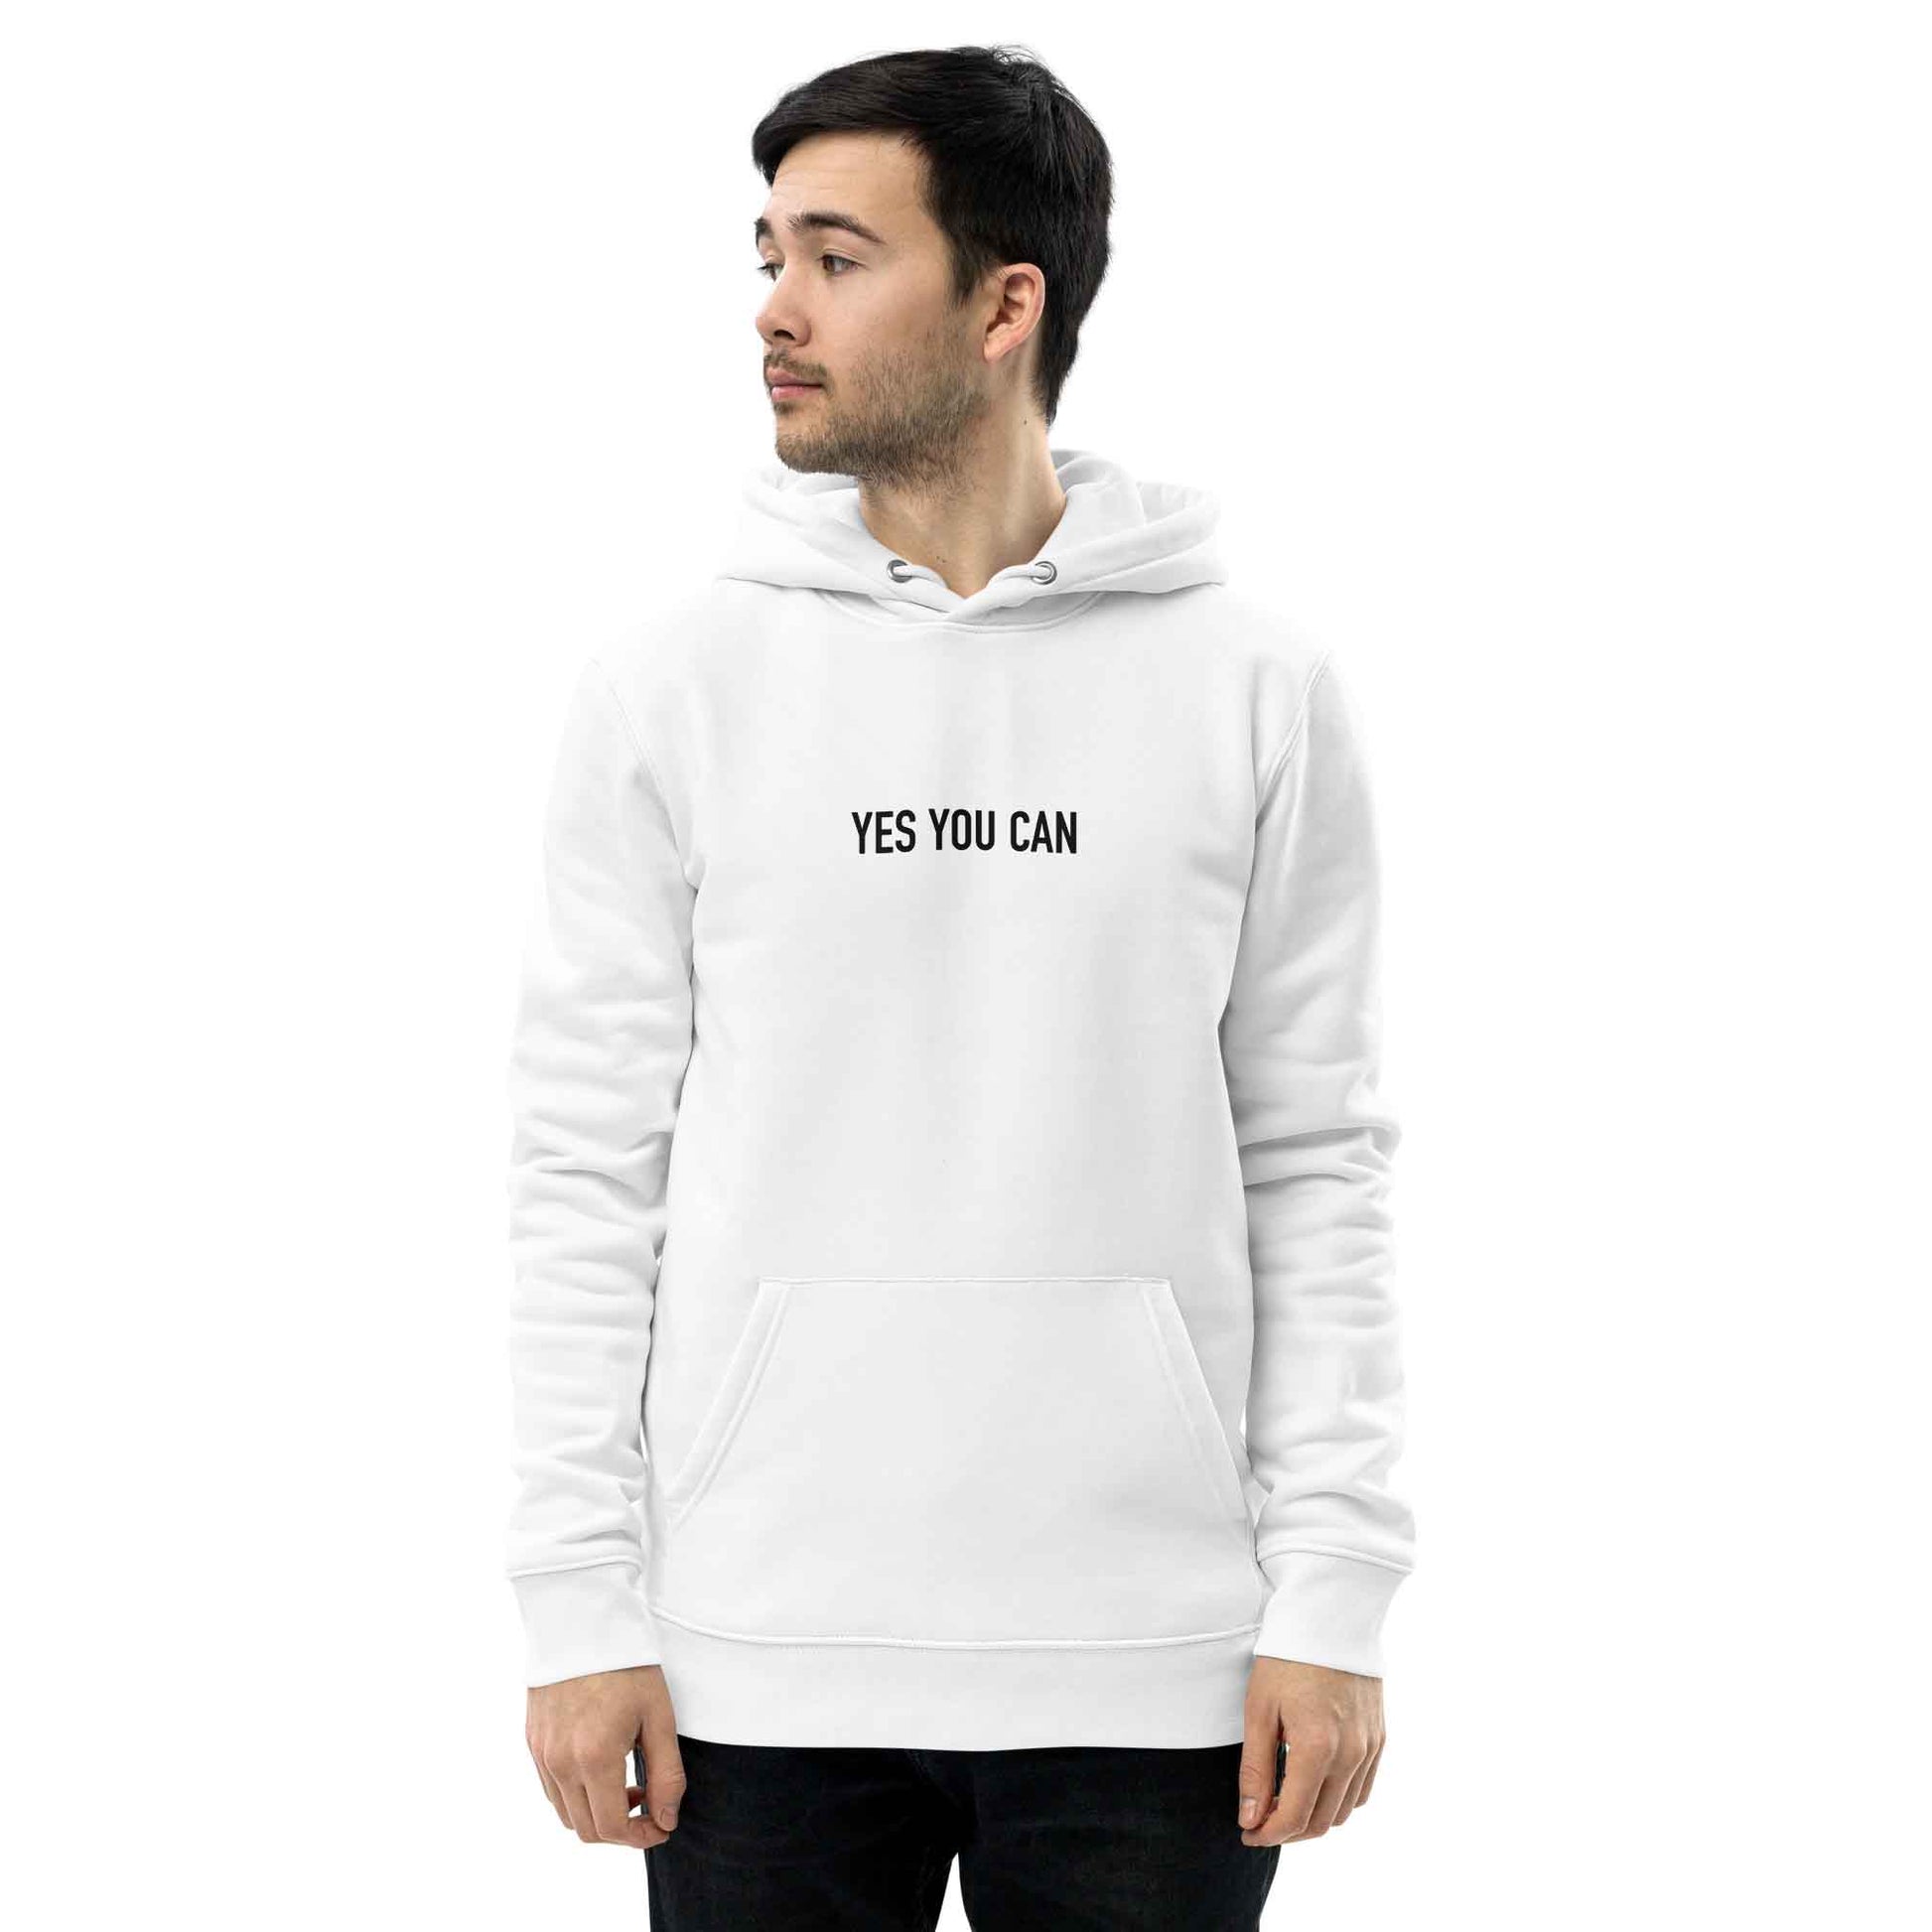 Men white inspirational hoodie with inspirational quote, "Yes You Can."